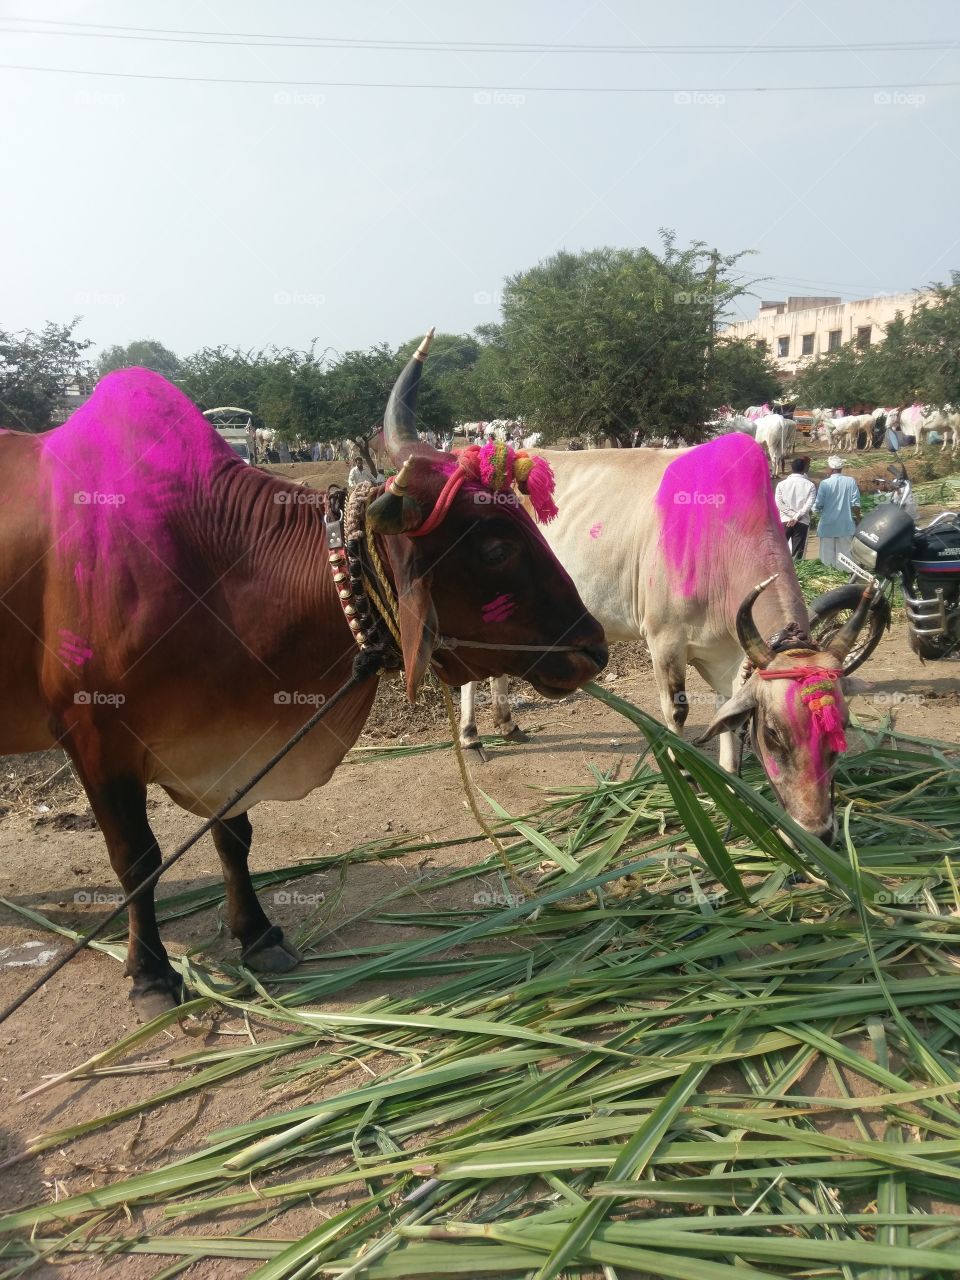 Decorated cows in a local market in India